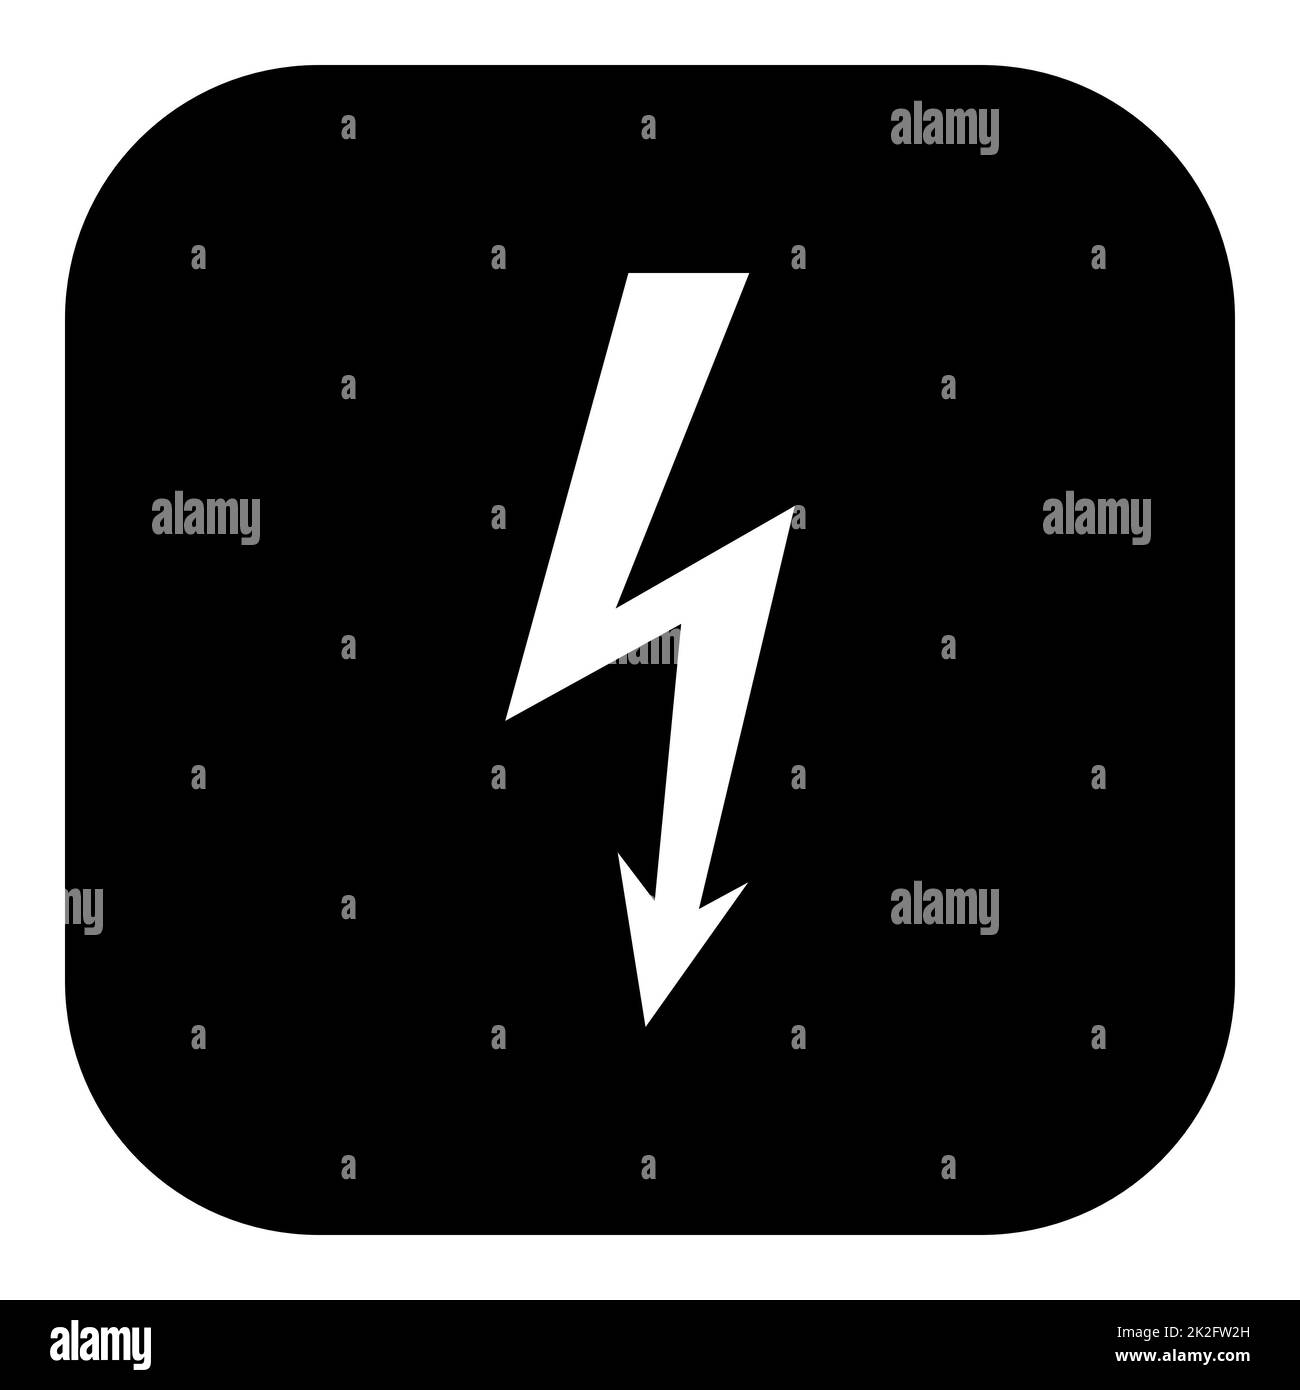 Lightning and app icon Stock Photo